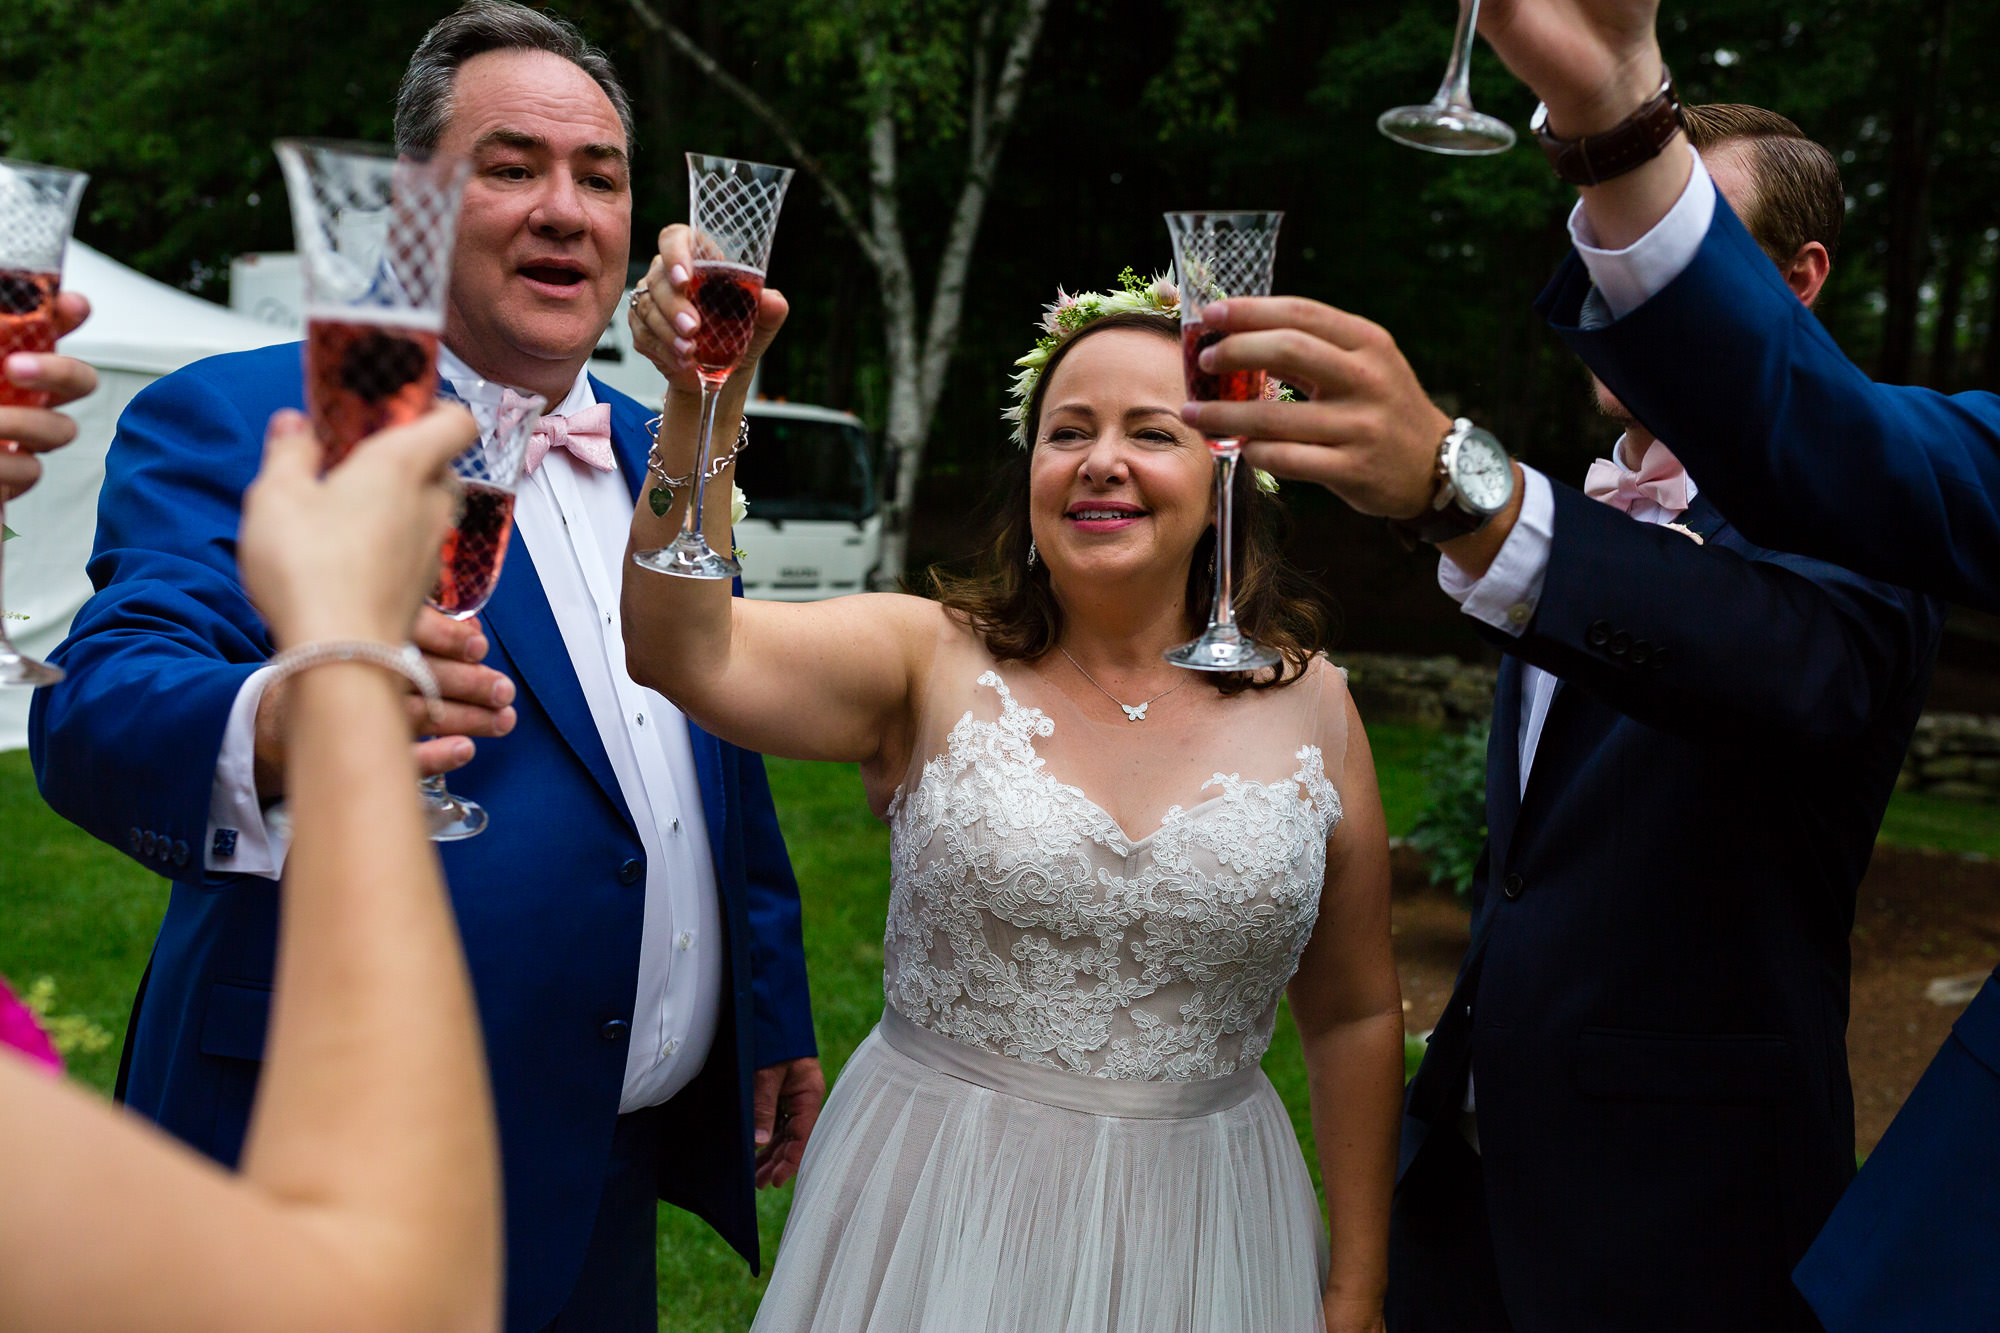 The wedding couple toasted their wedding party